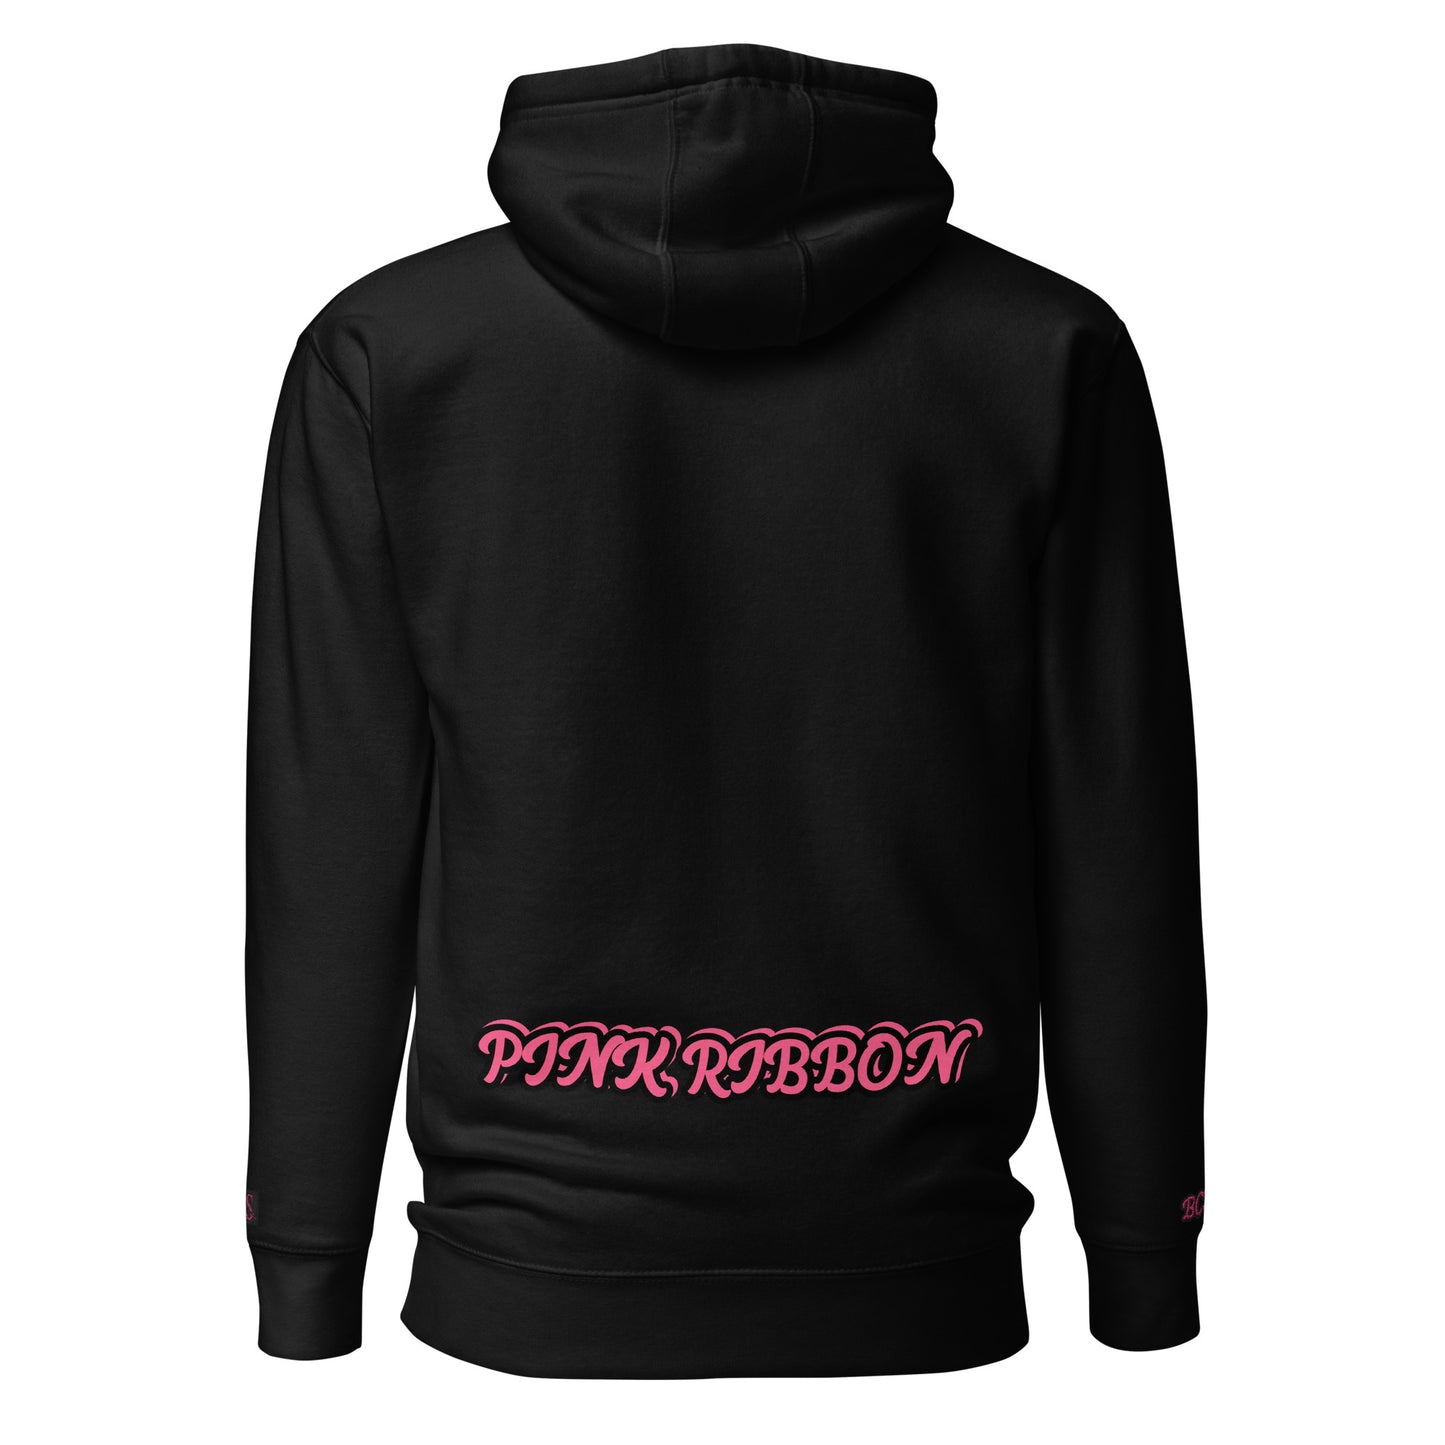 Breast Cancer Awareness Month Hoodie